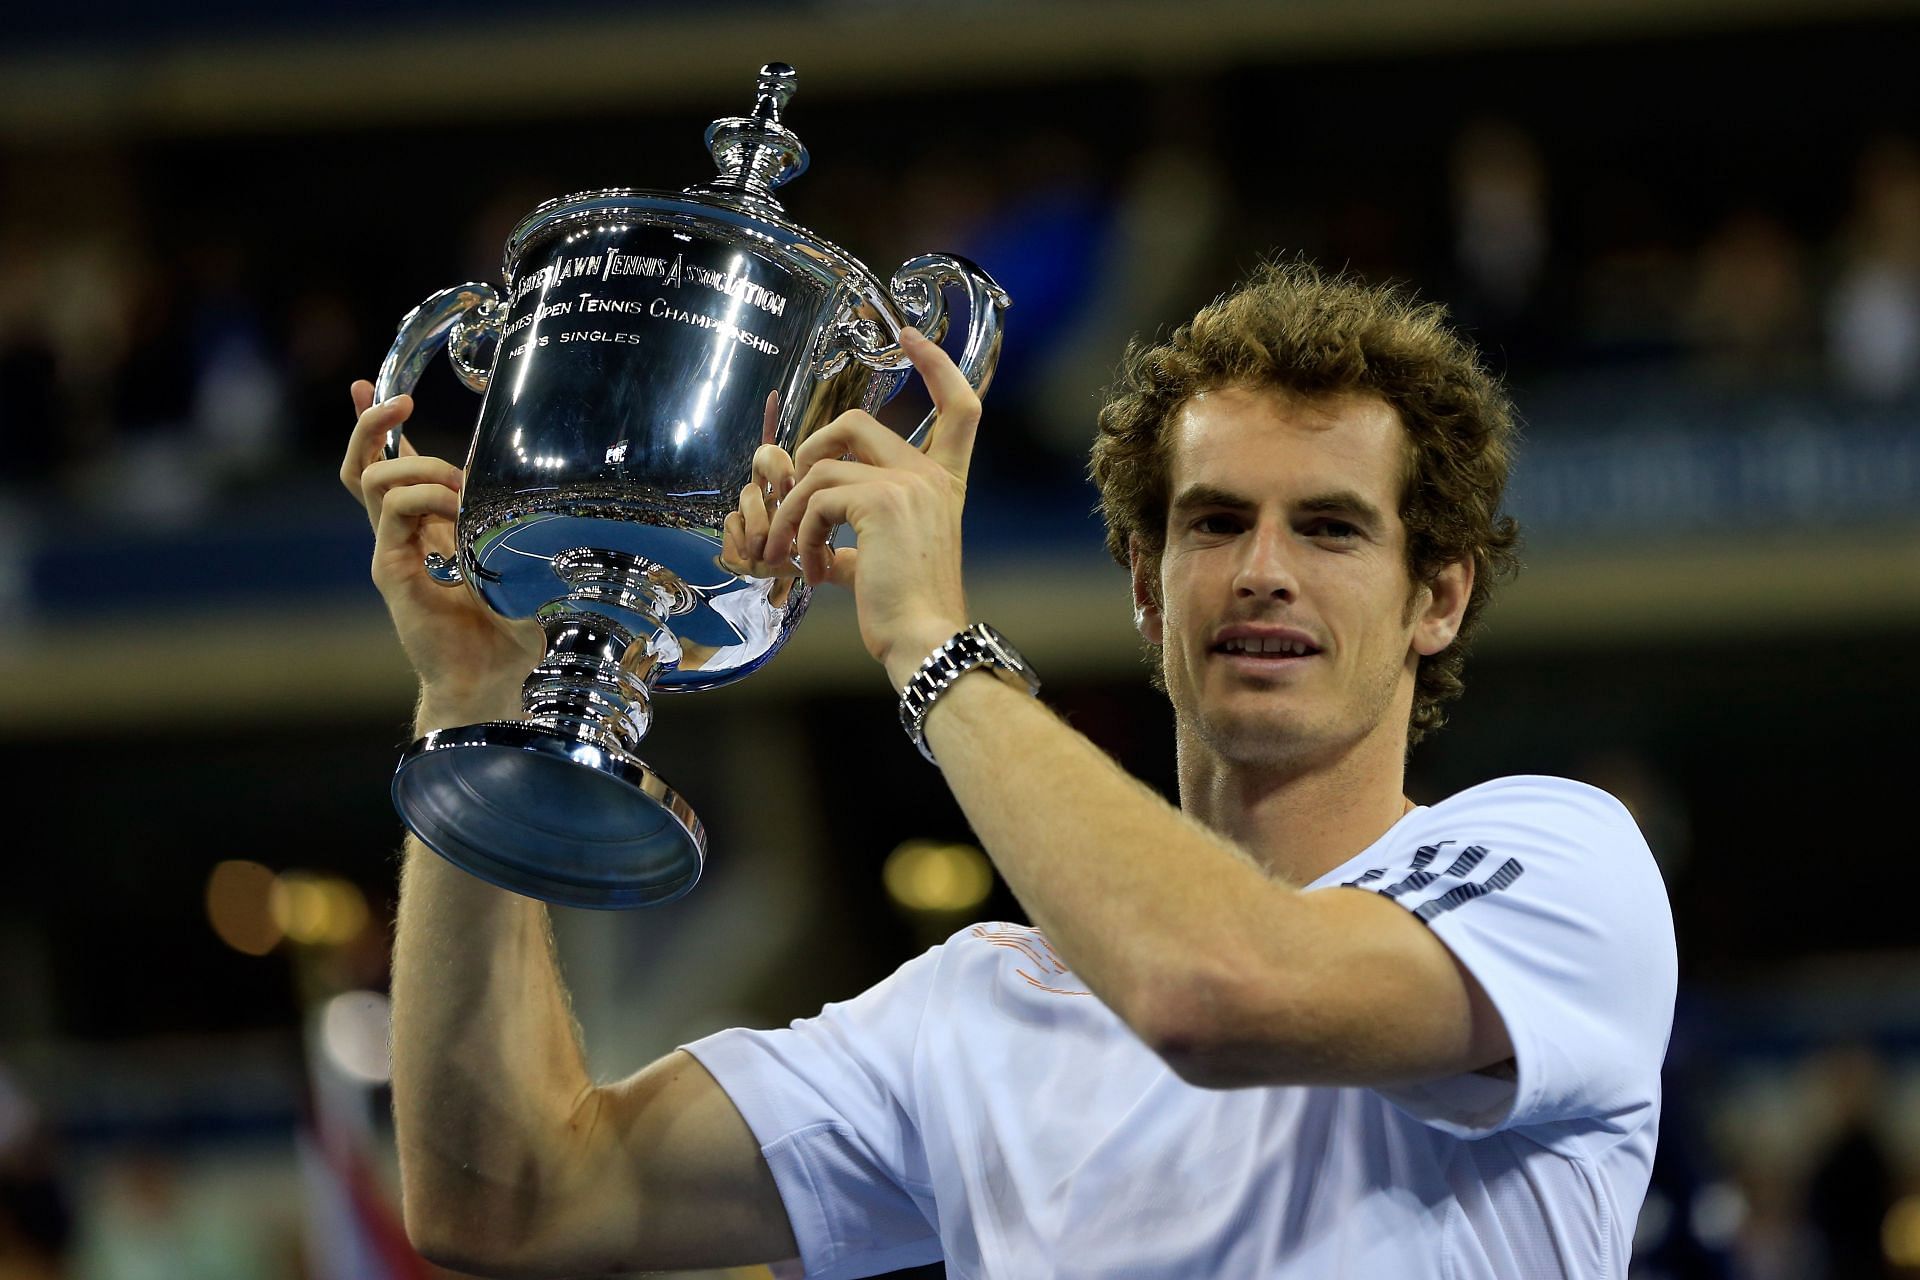 Murray pictured with the 2012 US Open trophy